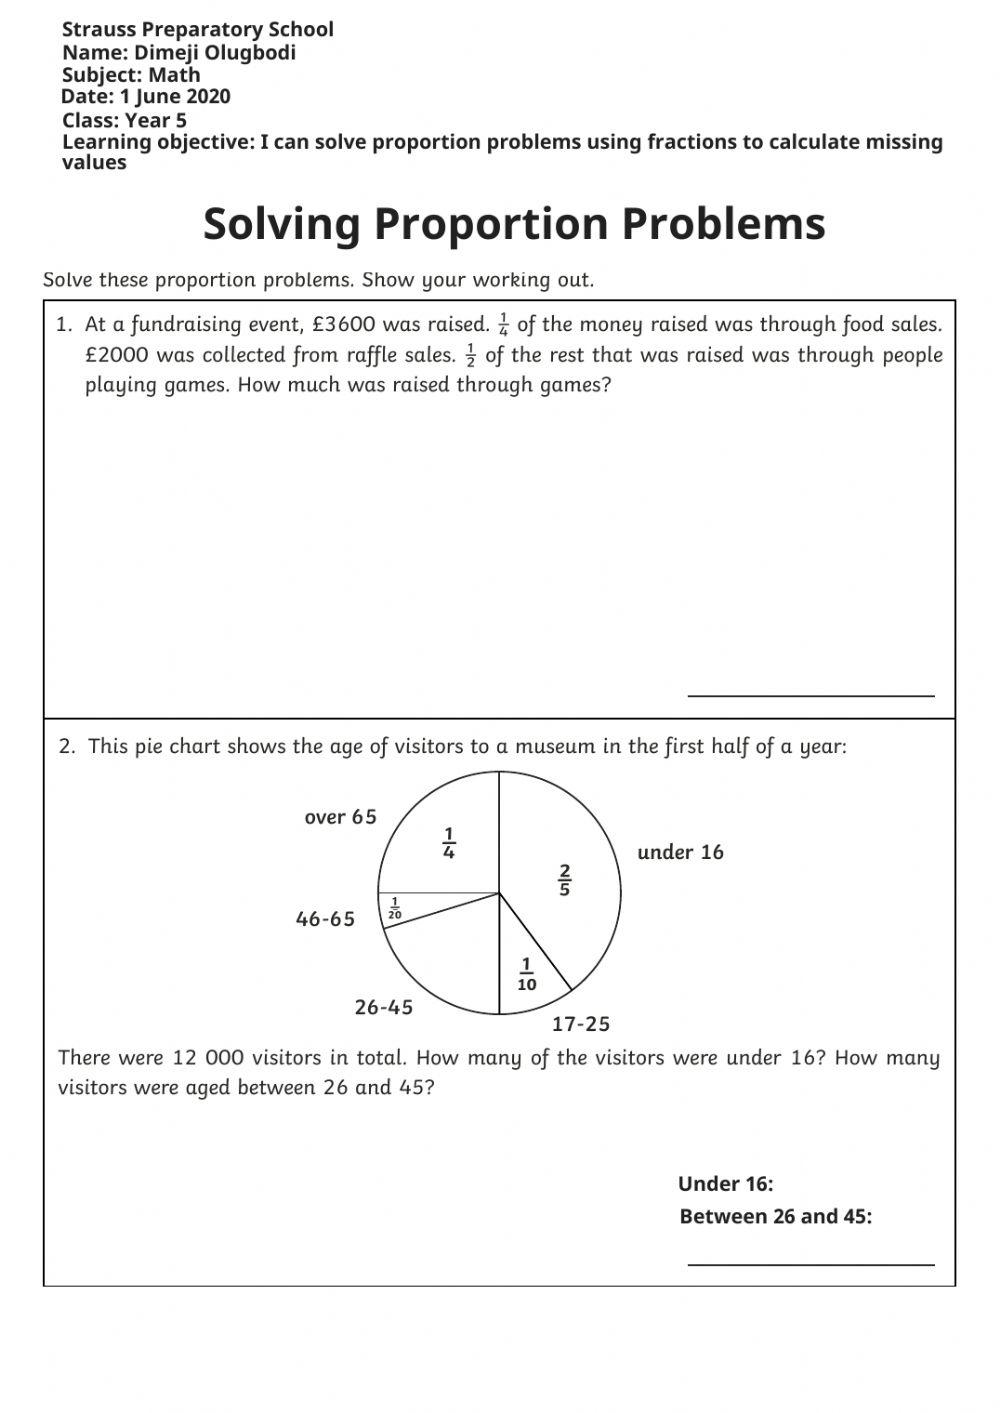 Solving Proportion Problems